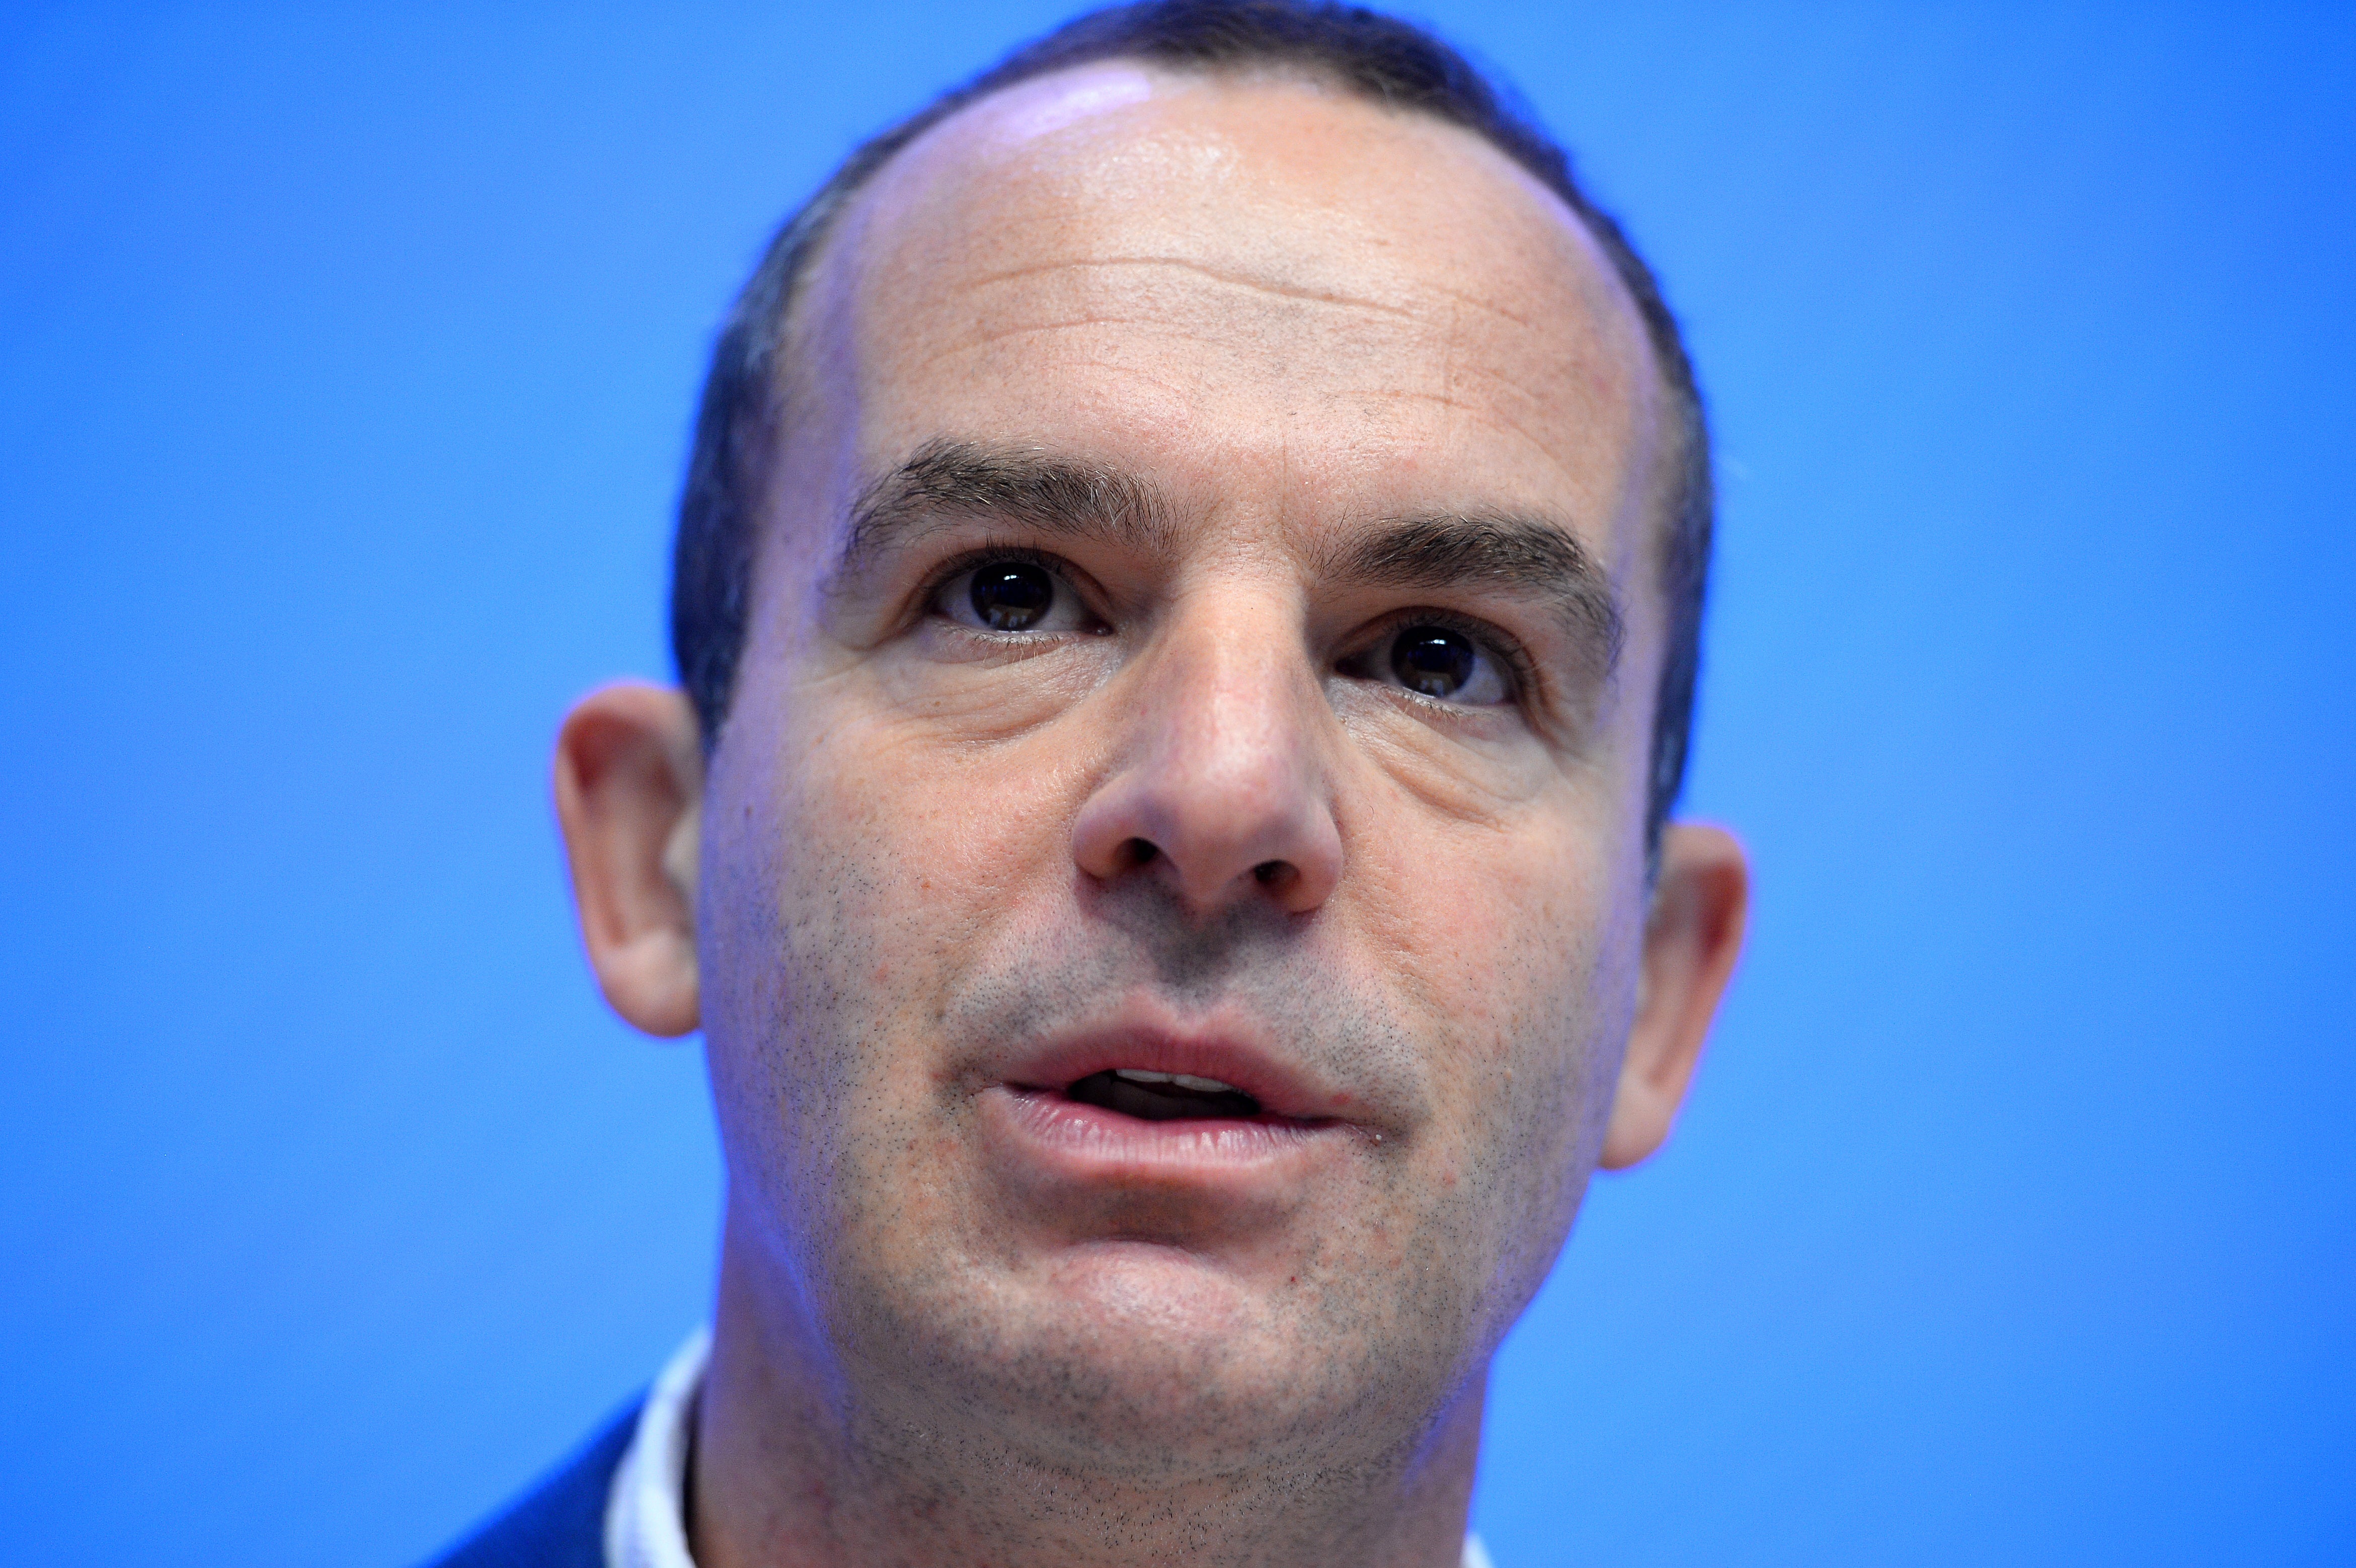 Martin Lewis has warned about the risks of soaring energy bills